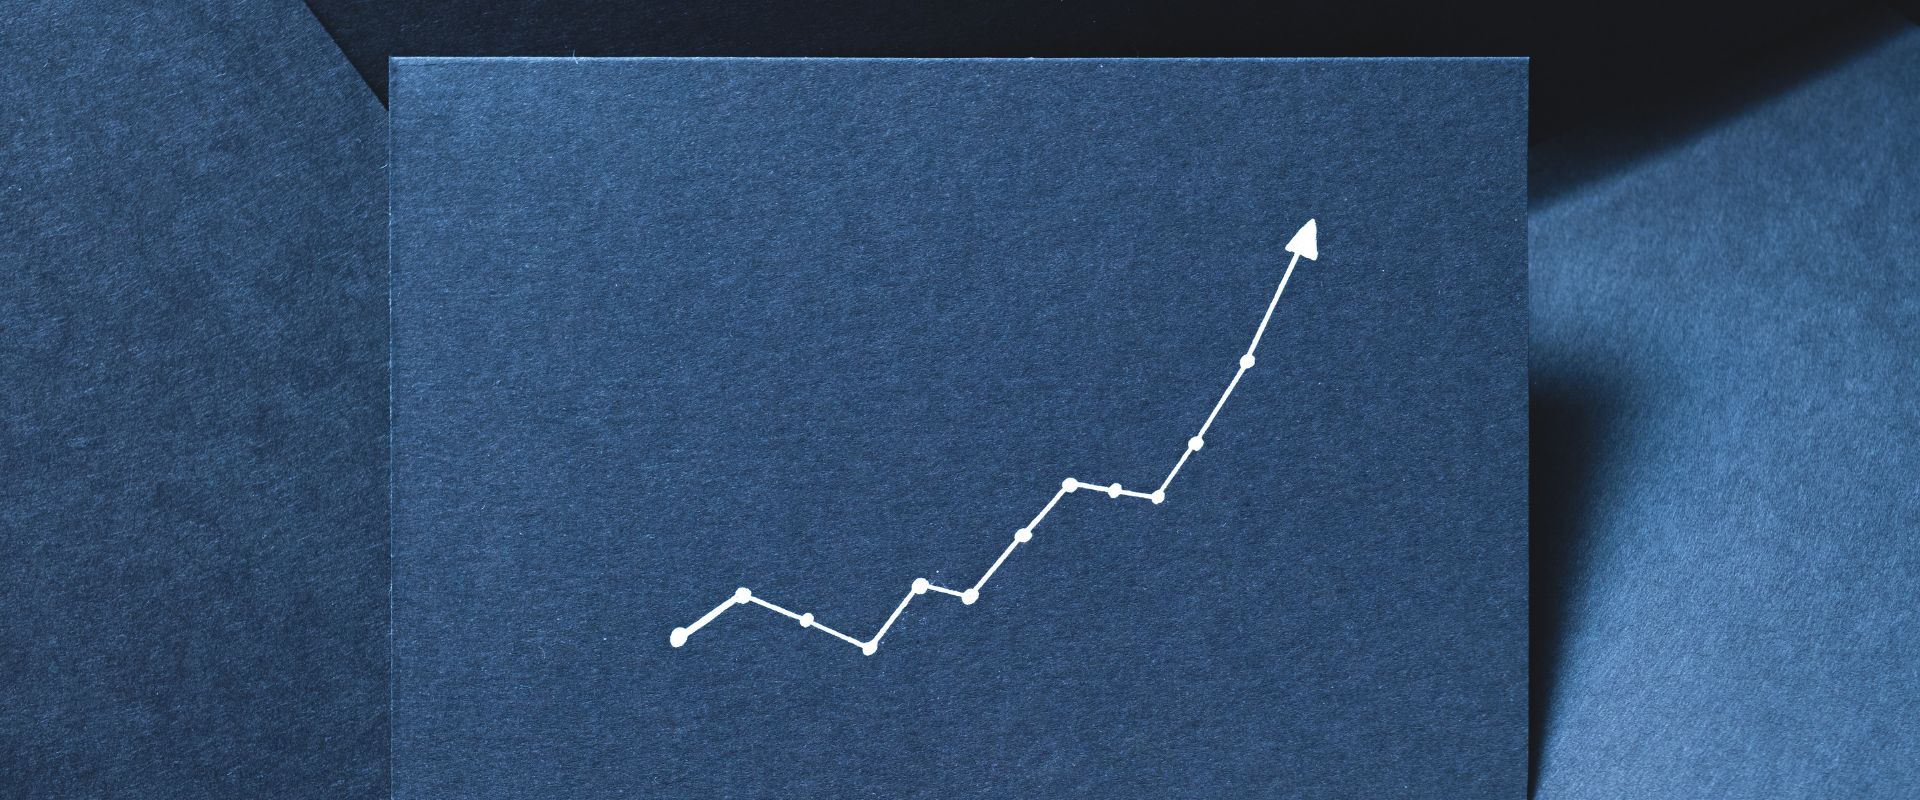 graph growth increase in blue back drop